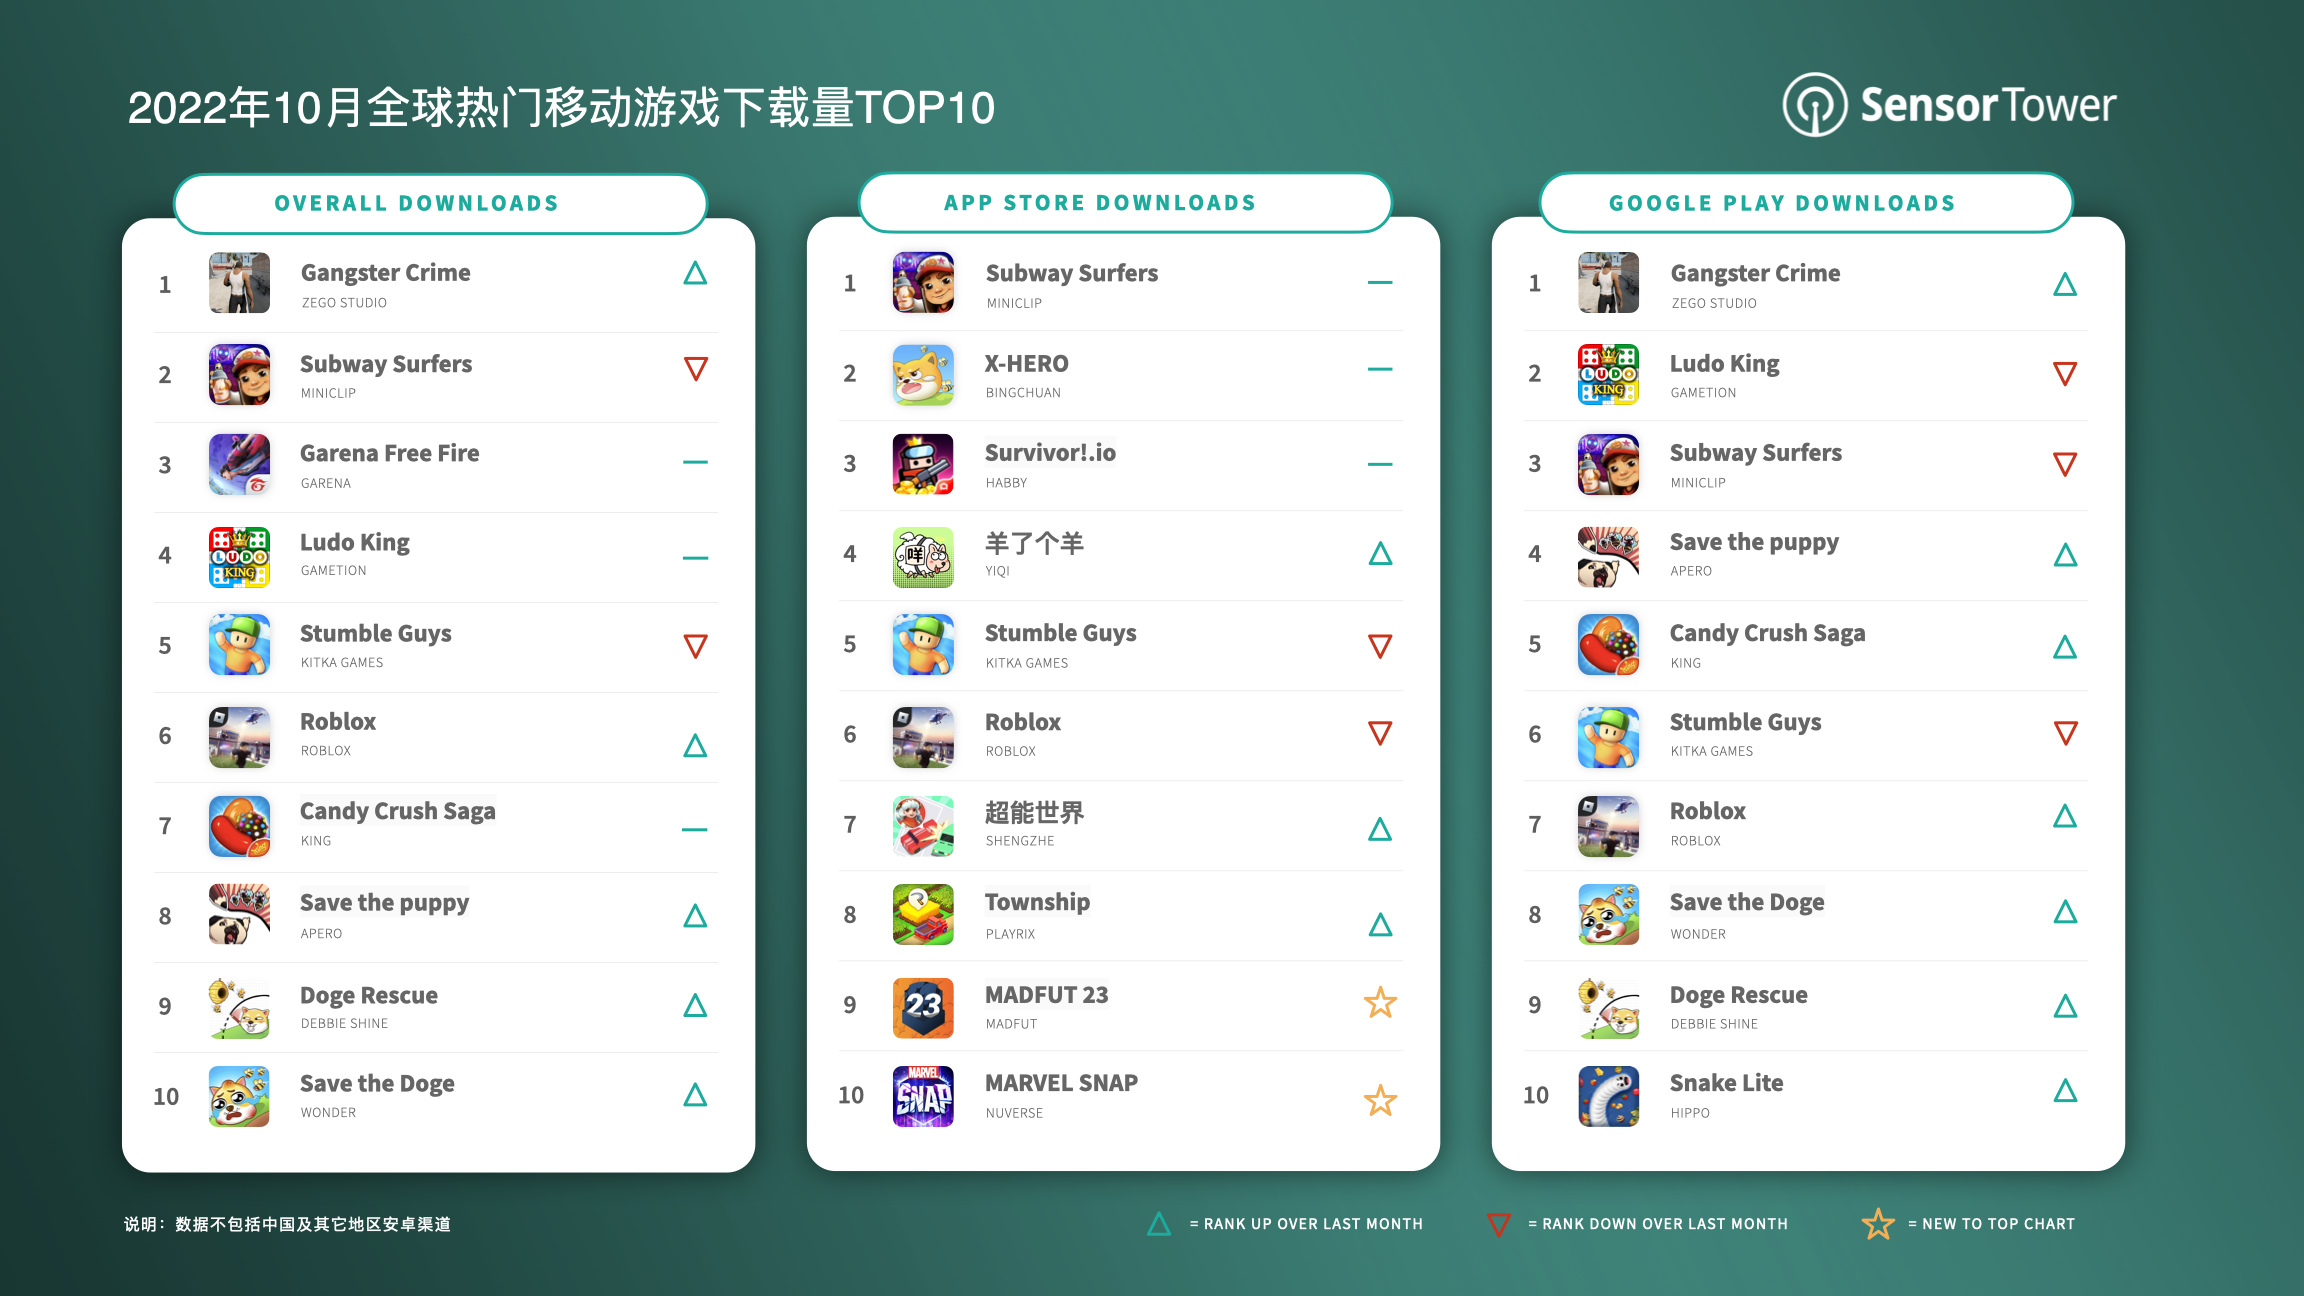 Top Mobile Games Worldwide for October 2022 by Downloads